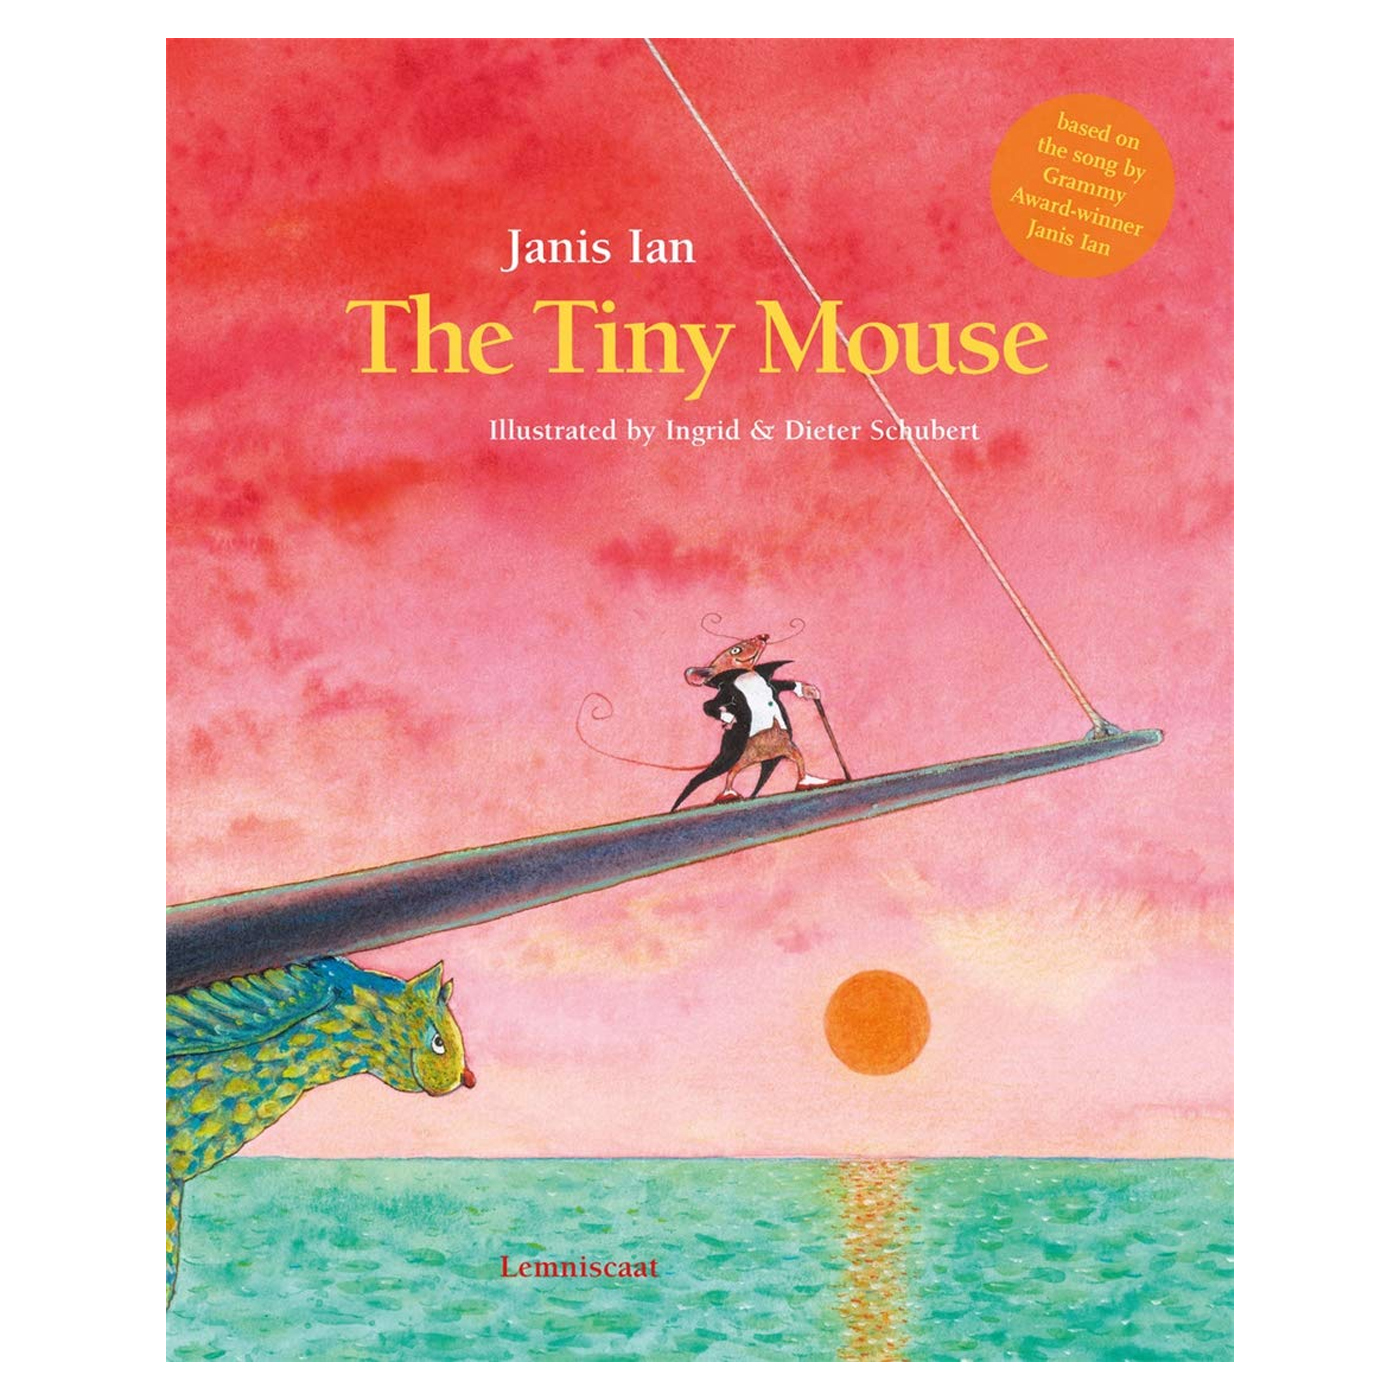  The Tiny Mouse